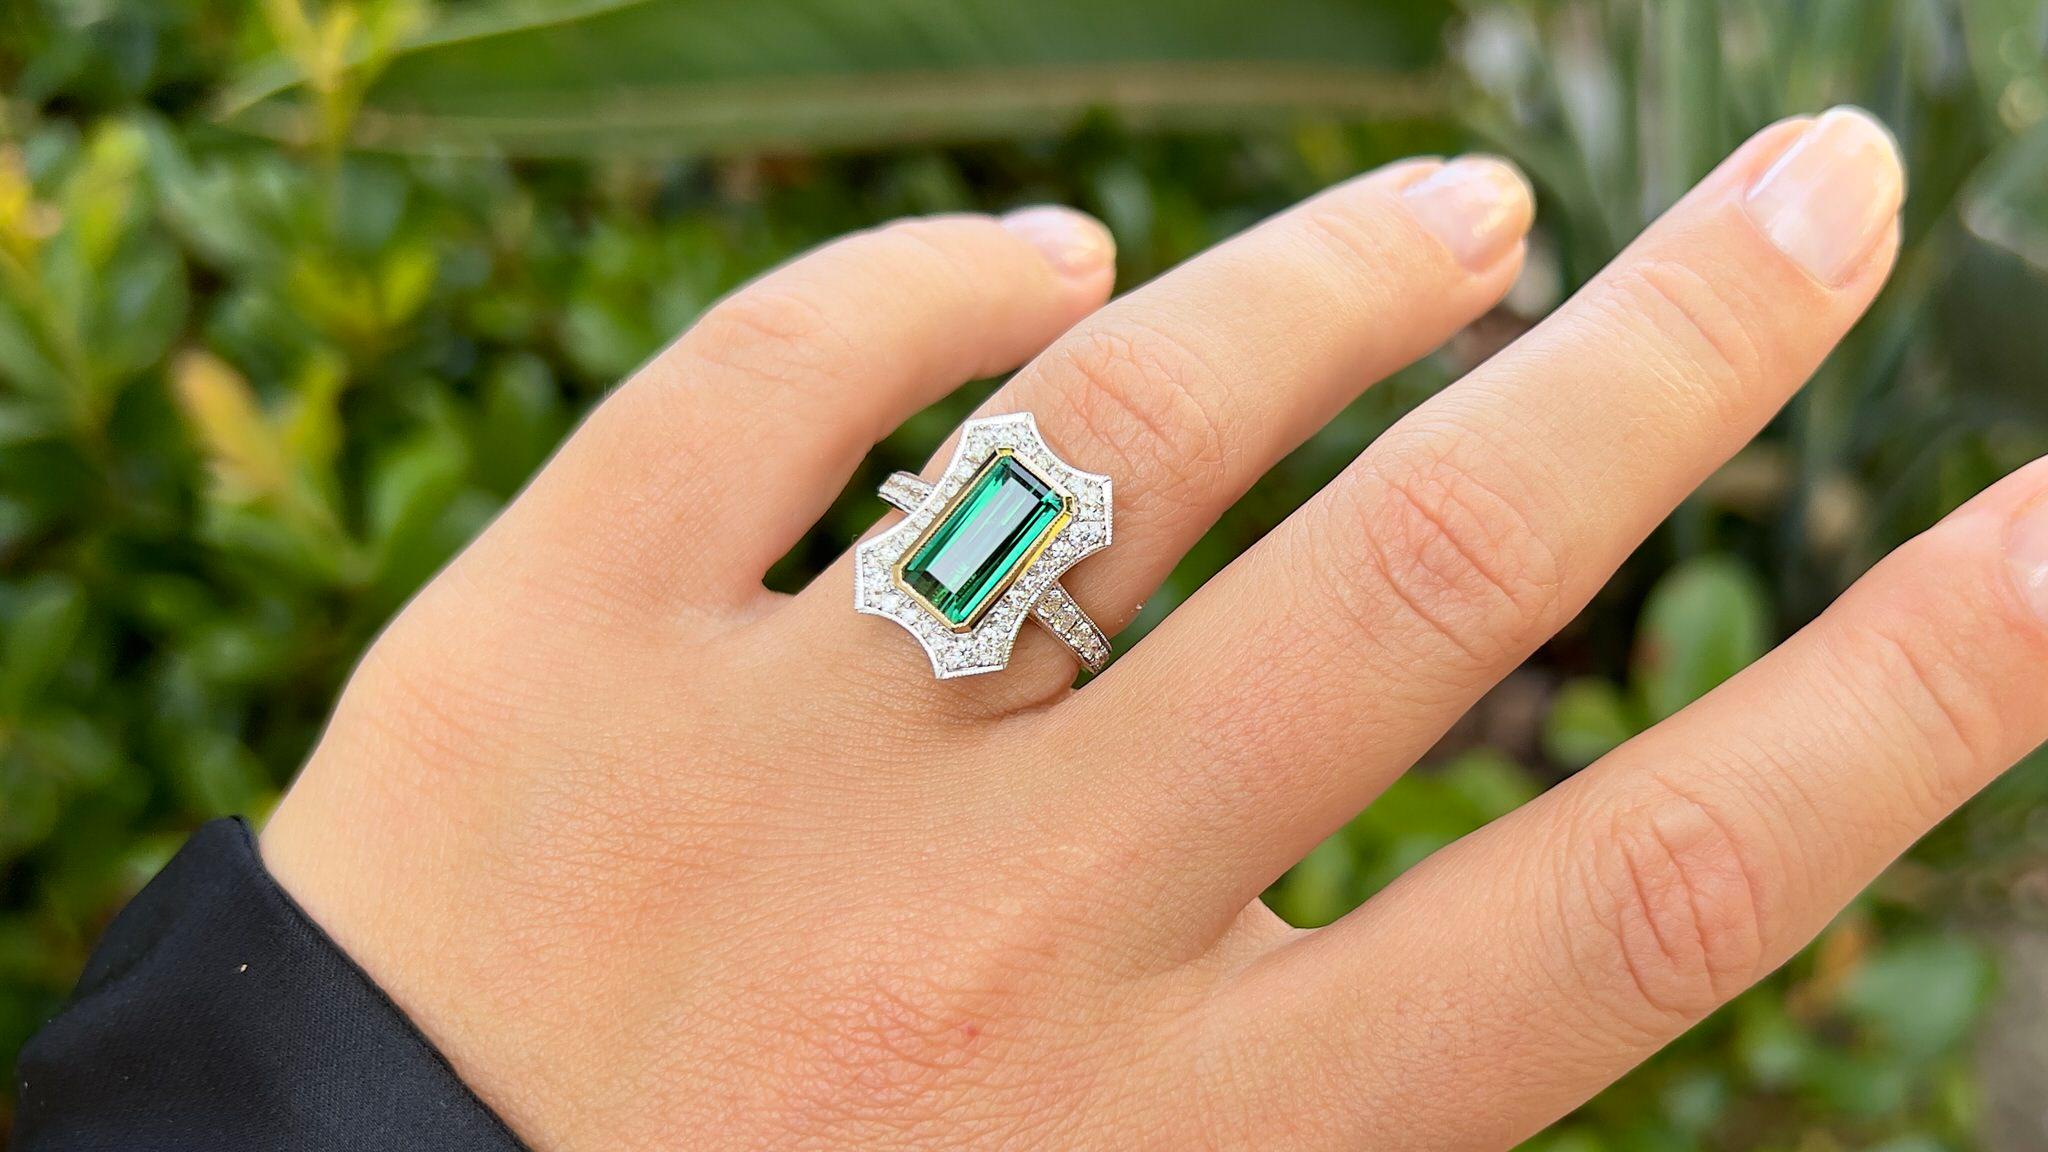 Emerald Cut Exceptional Natural Green Tourmaline Ring Diamond Setting 3.42 Carats 14K Gold For Sale